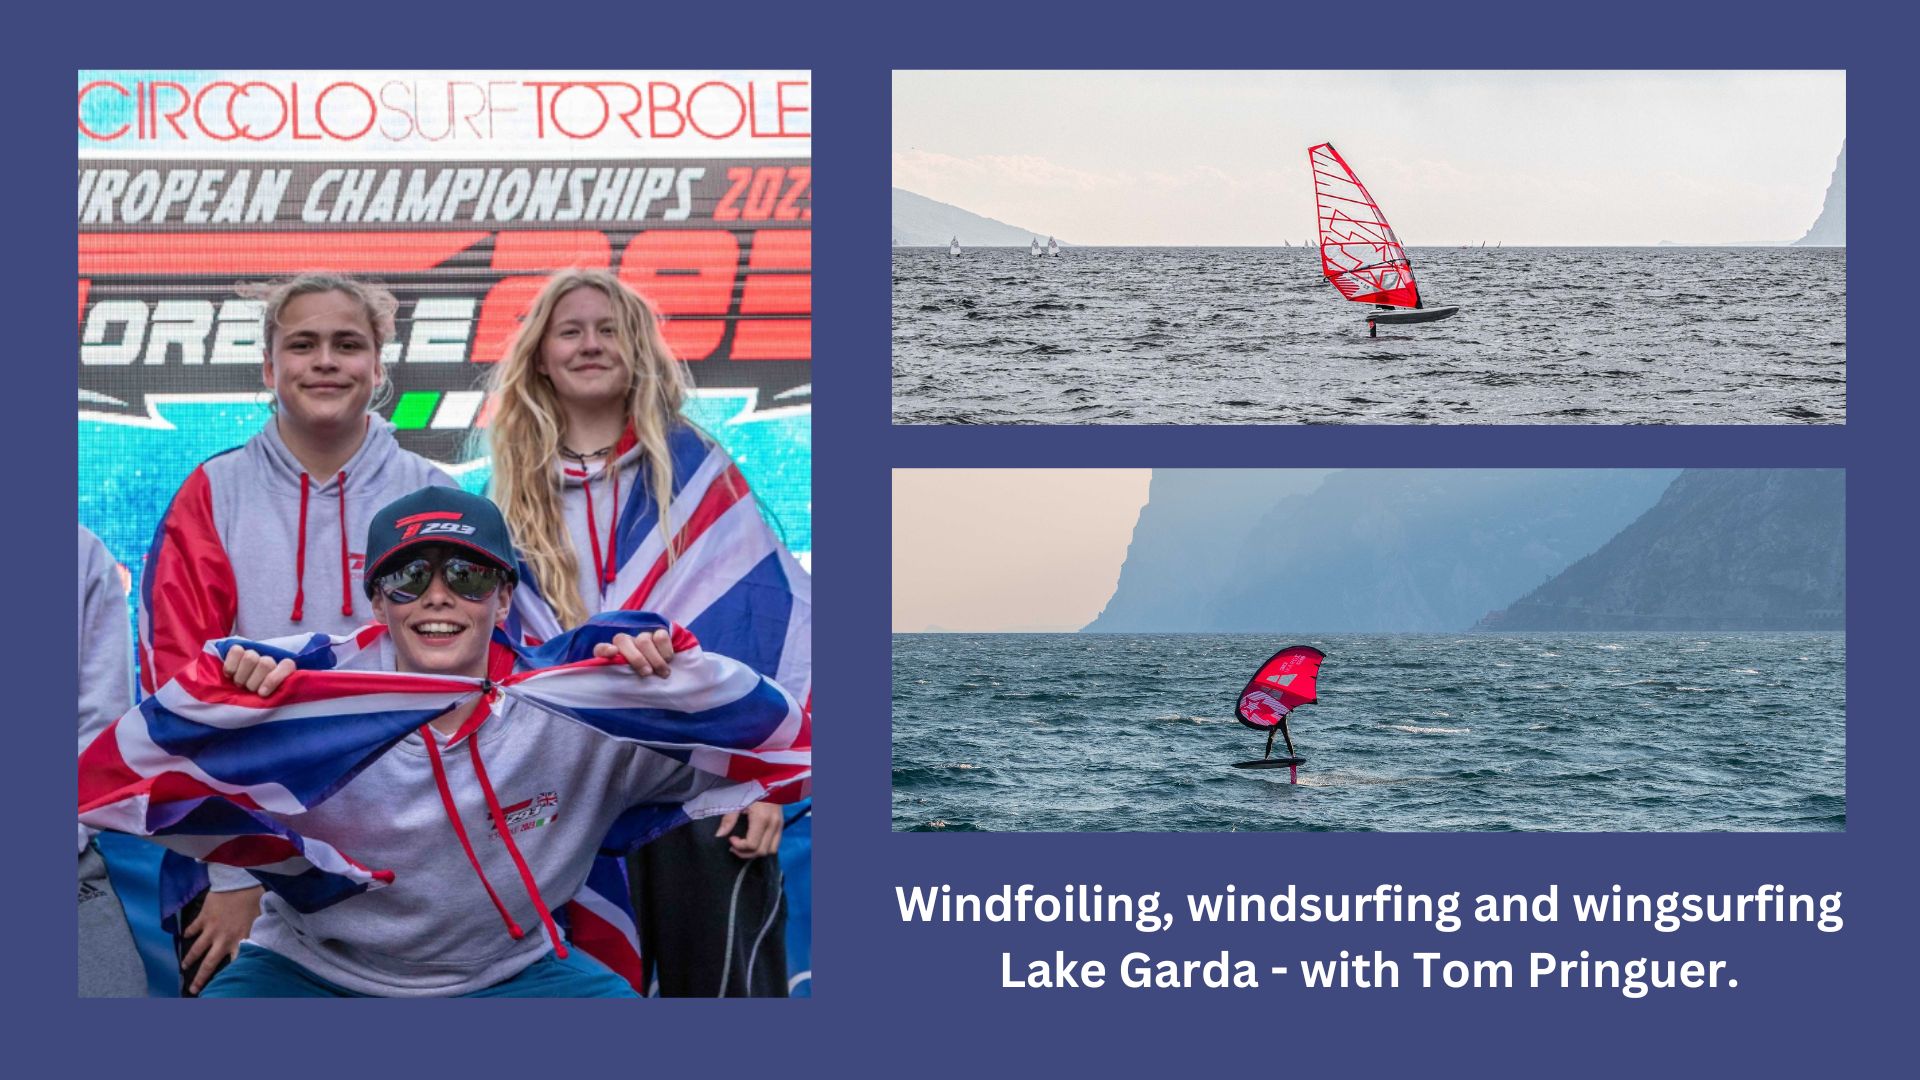 Windfoiling, windsurfing and wingsurfing Lake Garda – with Tom Pringuer.